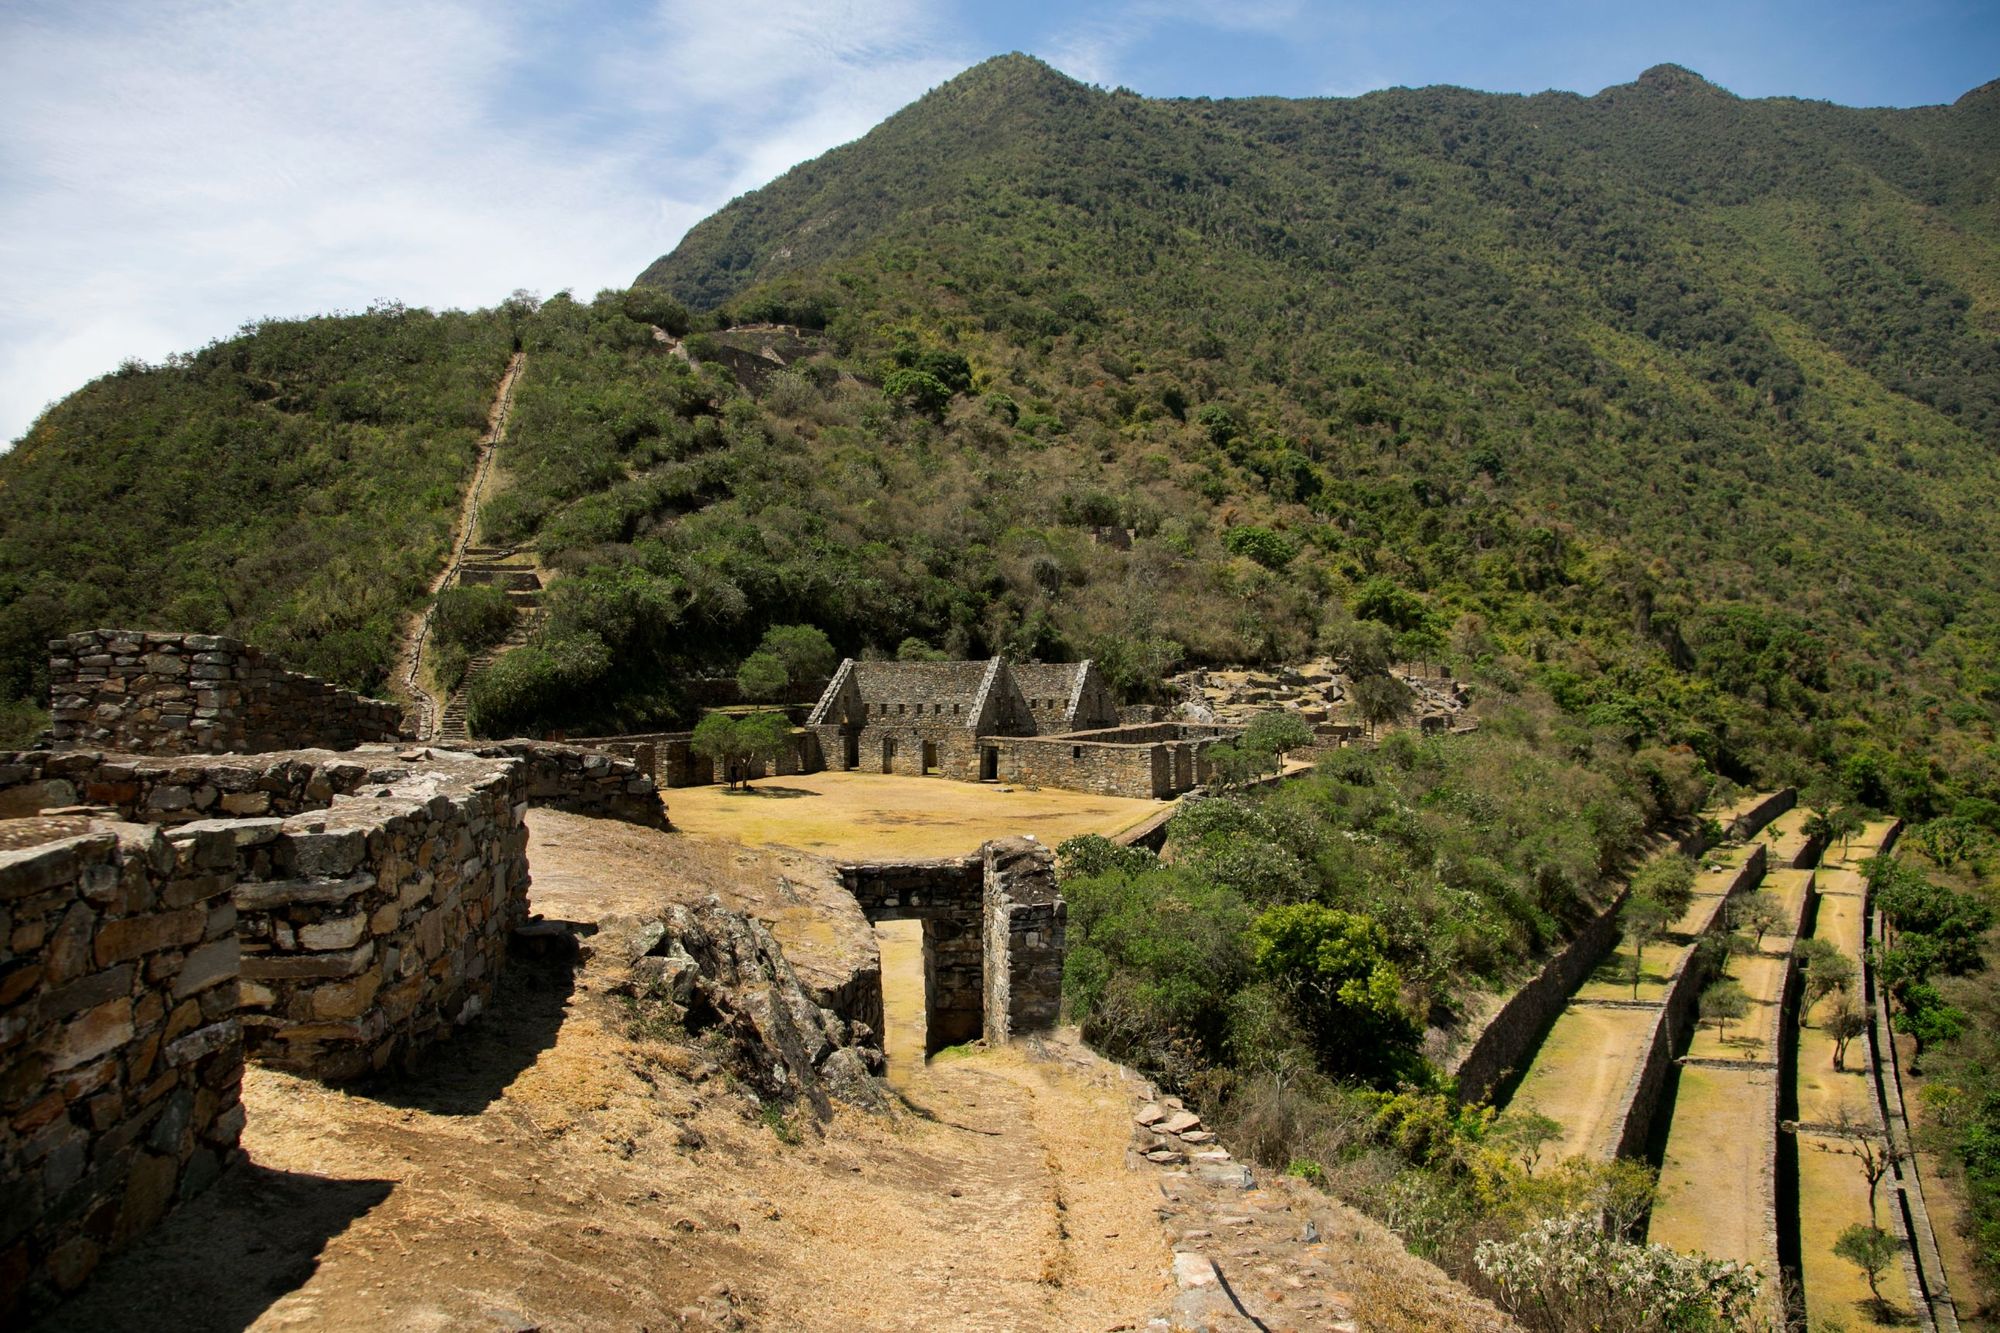 The ruins of Choquequirao, an Inca archaeological site in Peru, similar in structure and architecture to Machu Picchu. Photo: Getty